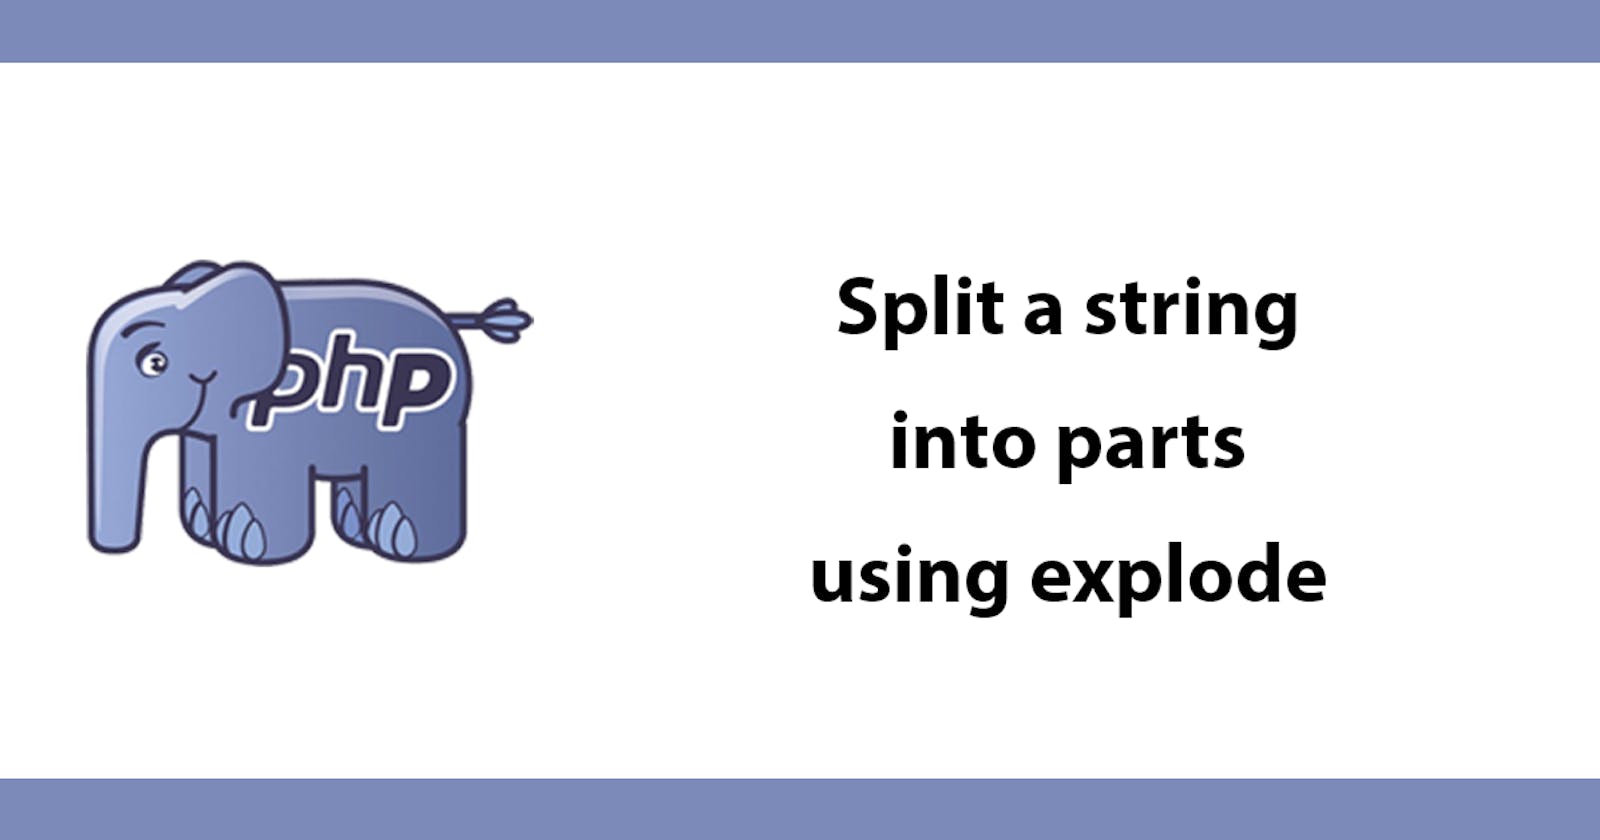 Split a string into parts using explode